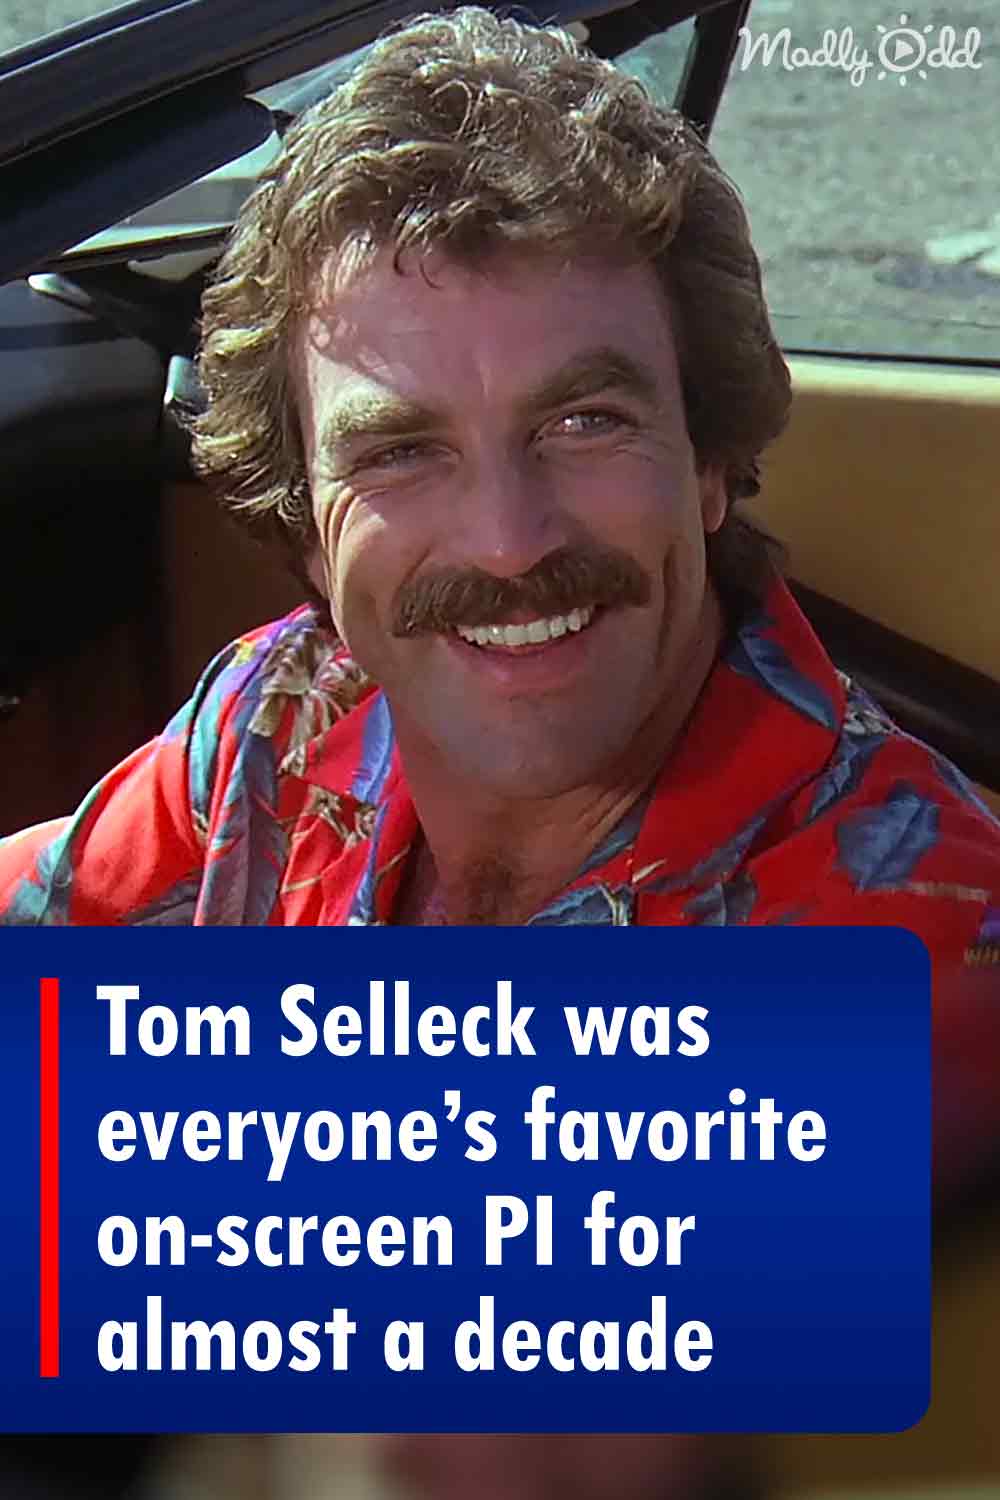 Tom Selleck was everyone’s favorite on-screen PI for almost a decade